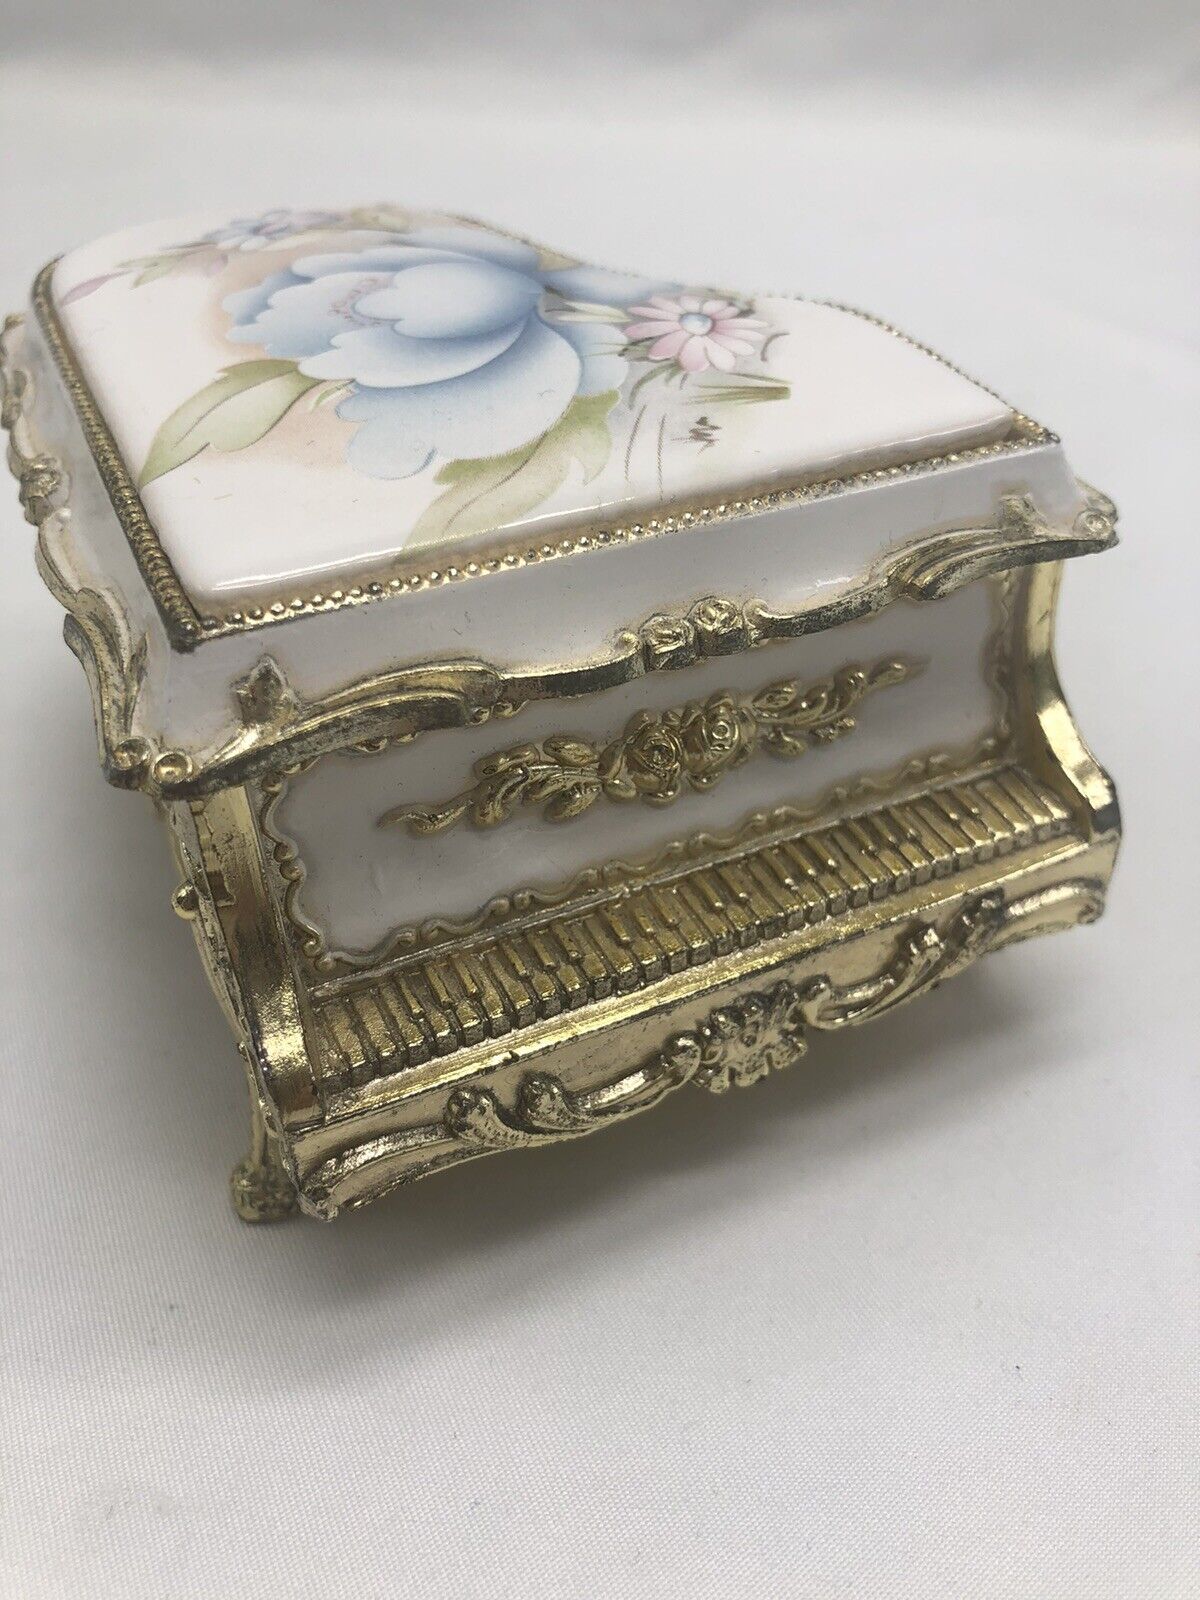 Beautiful Vintage Westland Co Footed Music Box w/Floral Porcelain Top, Japan